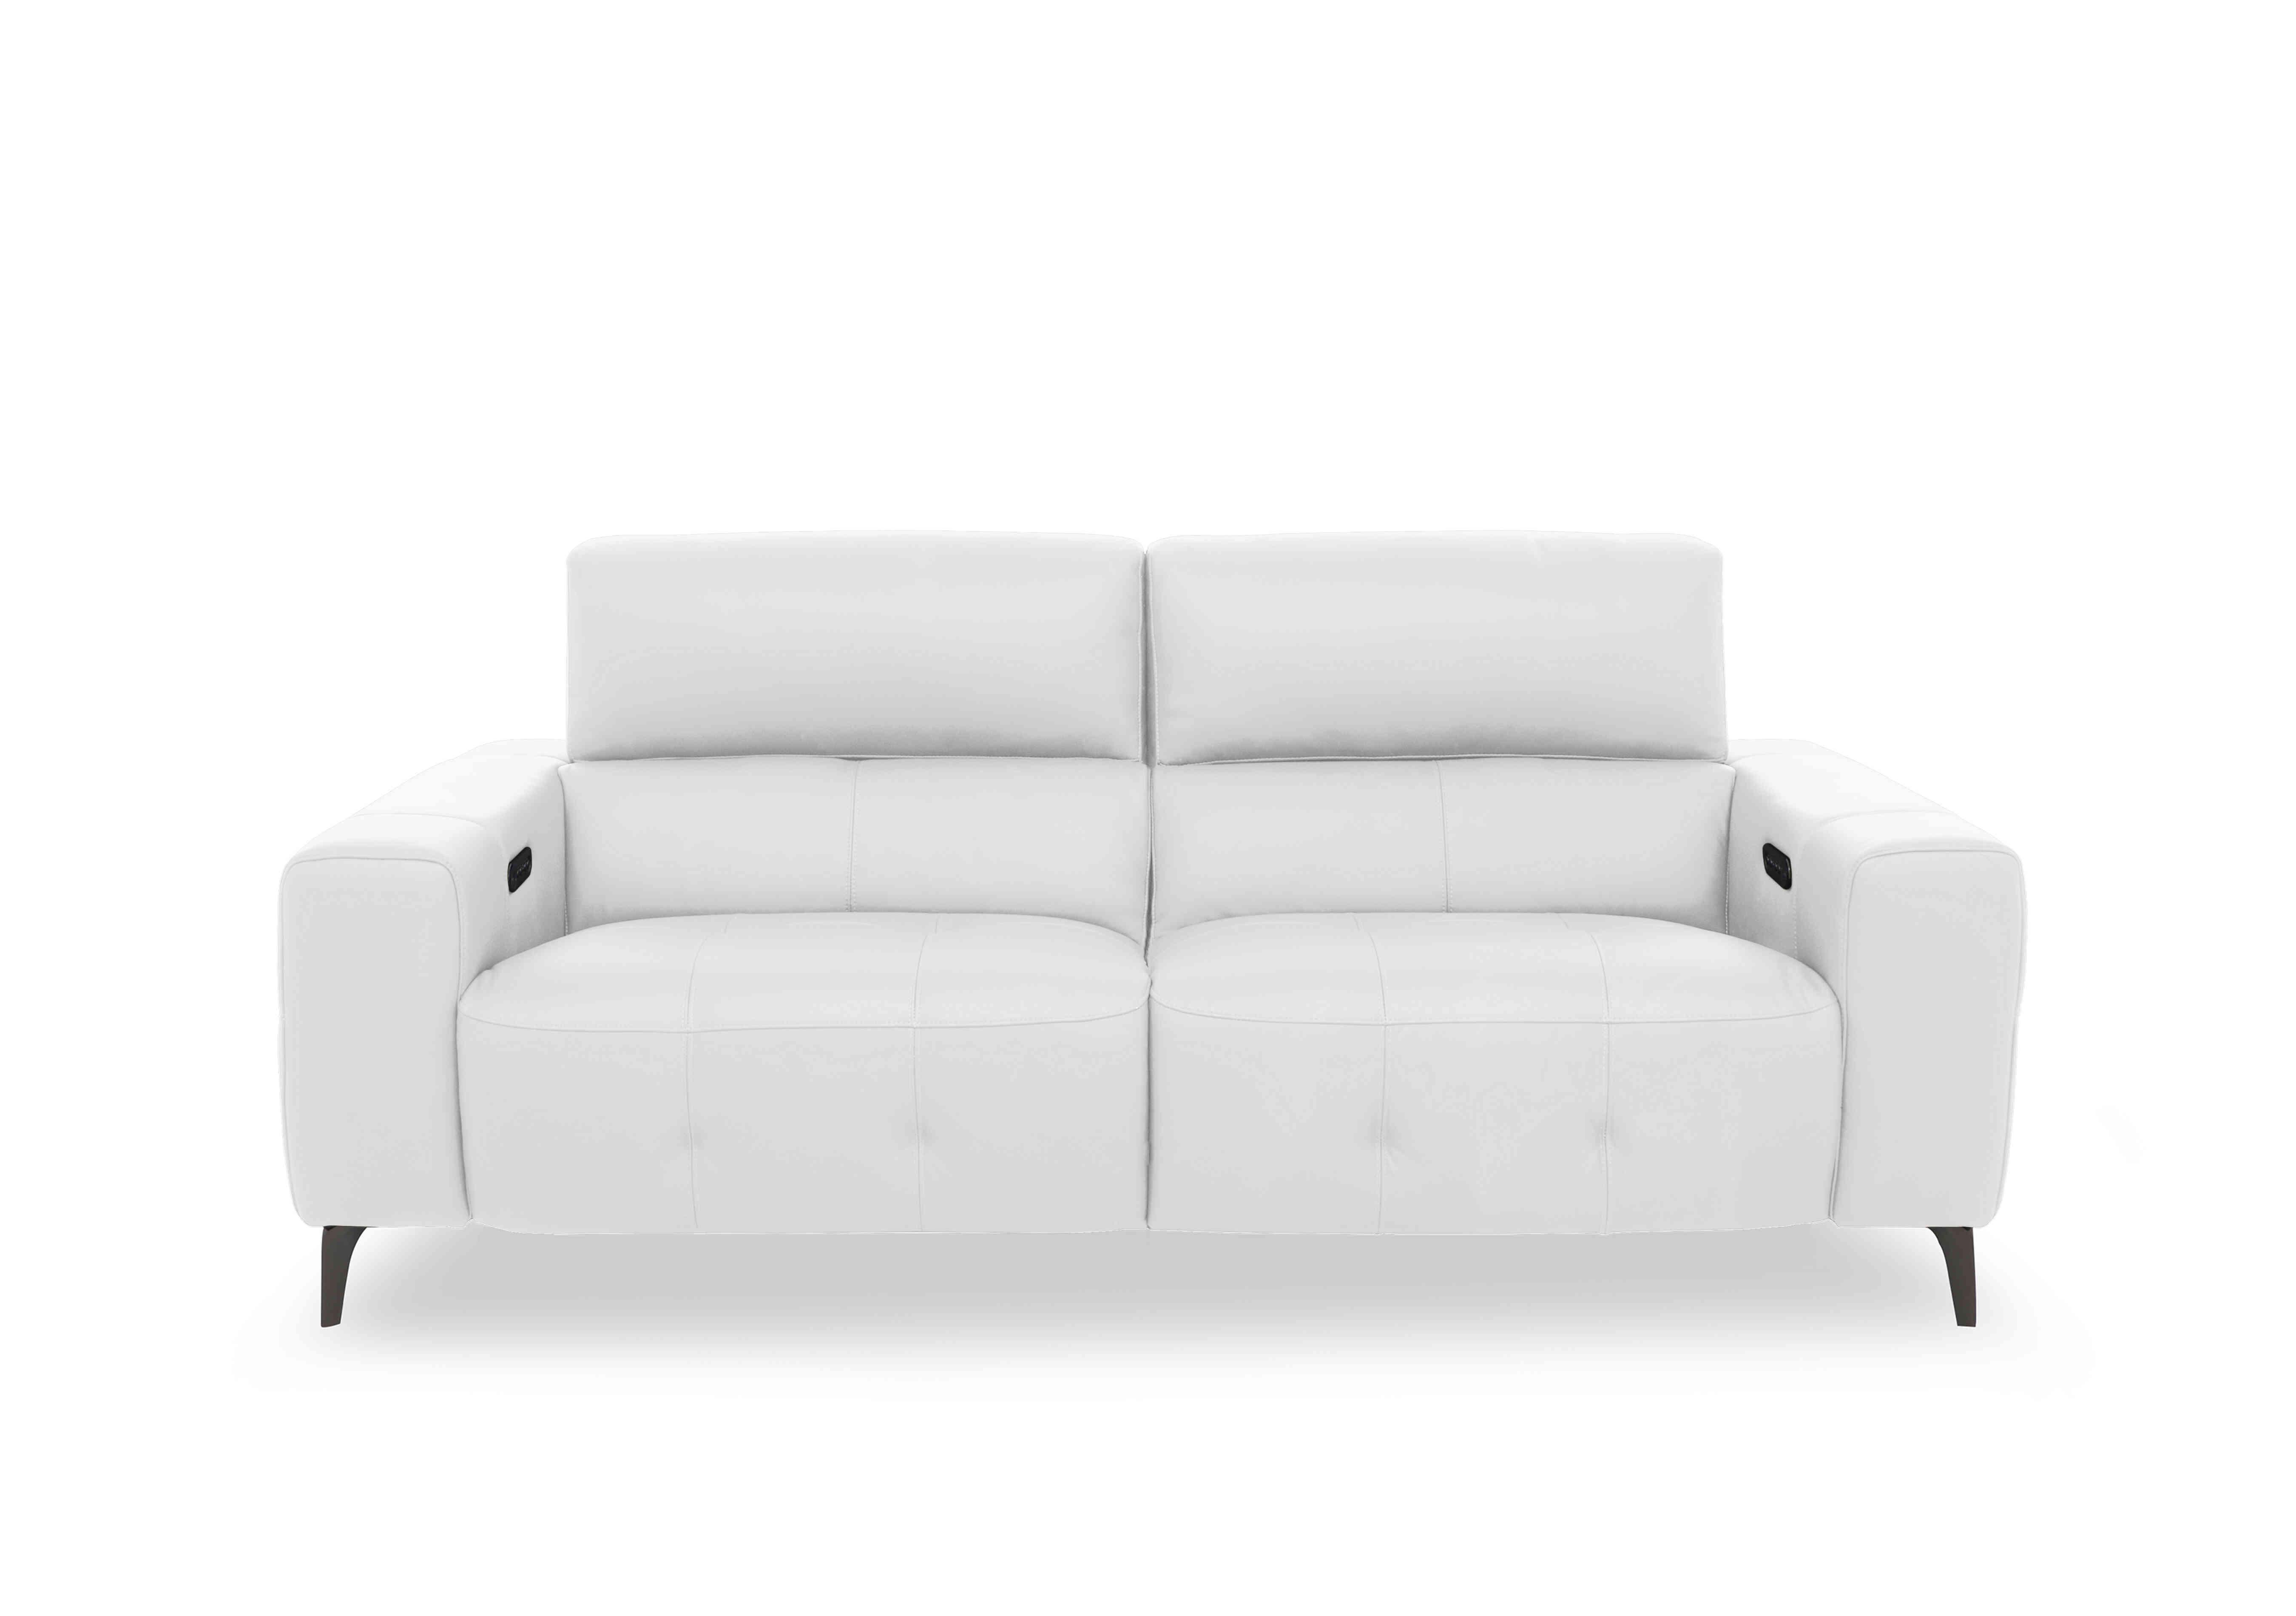 New York 3 Seater Leather Sofa in Bv-744d Star White on Furniture Village